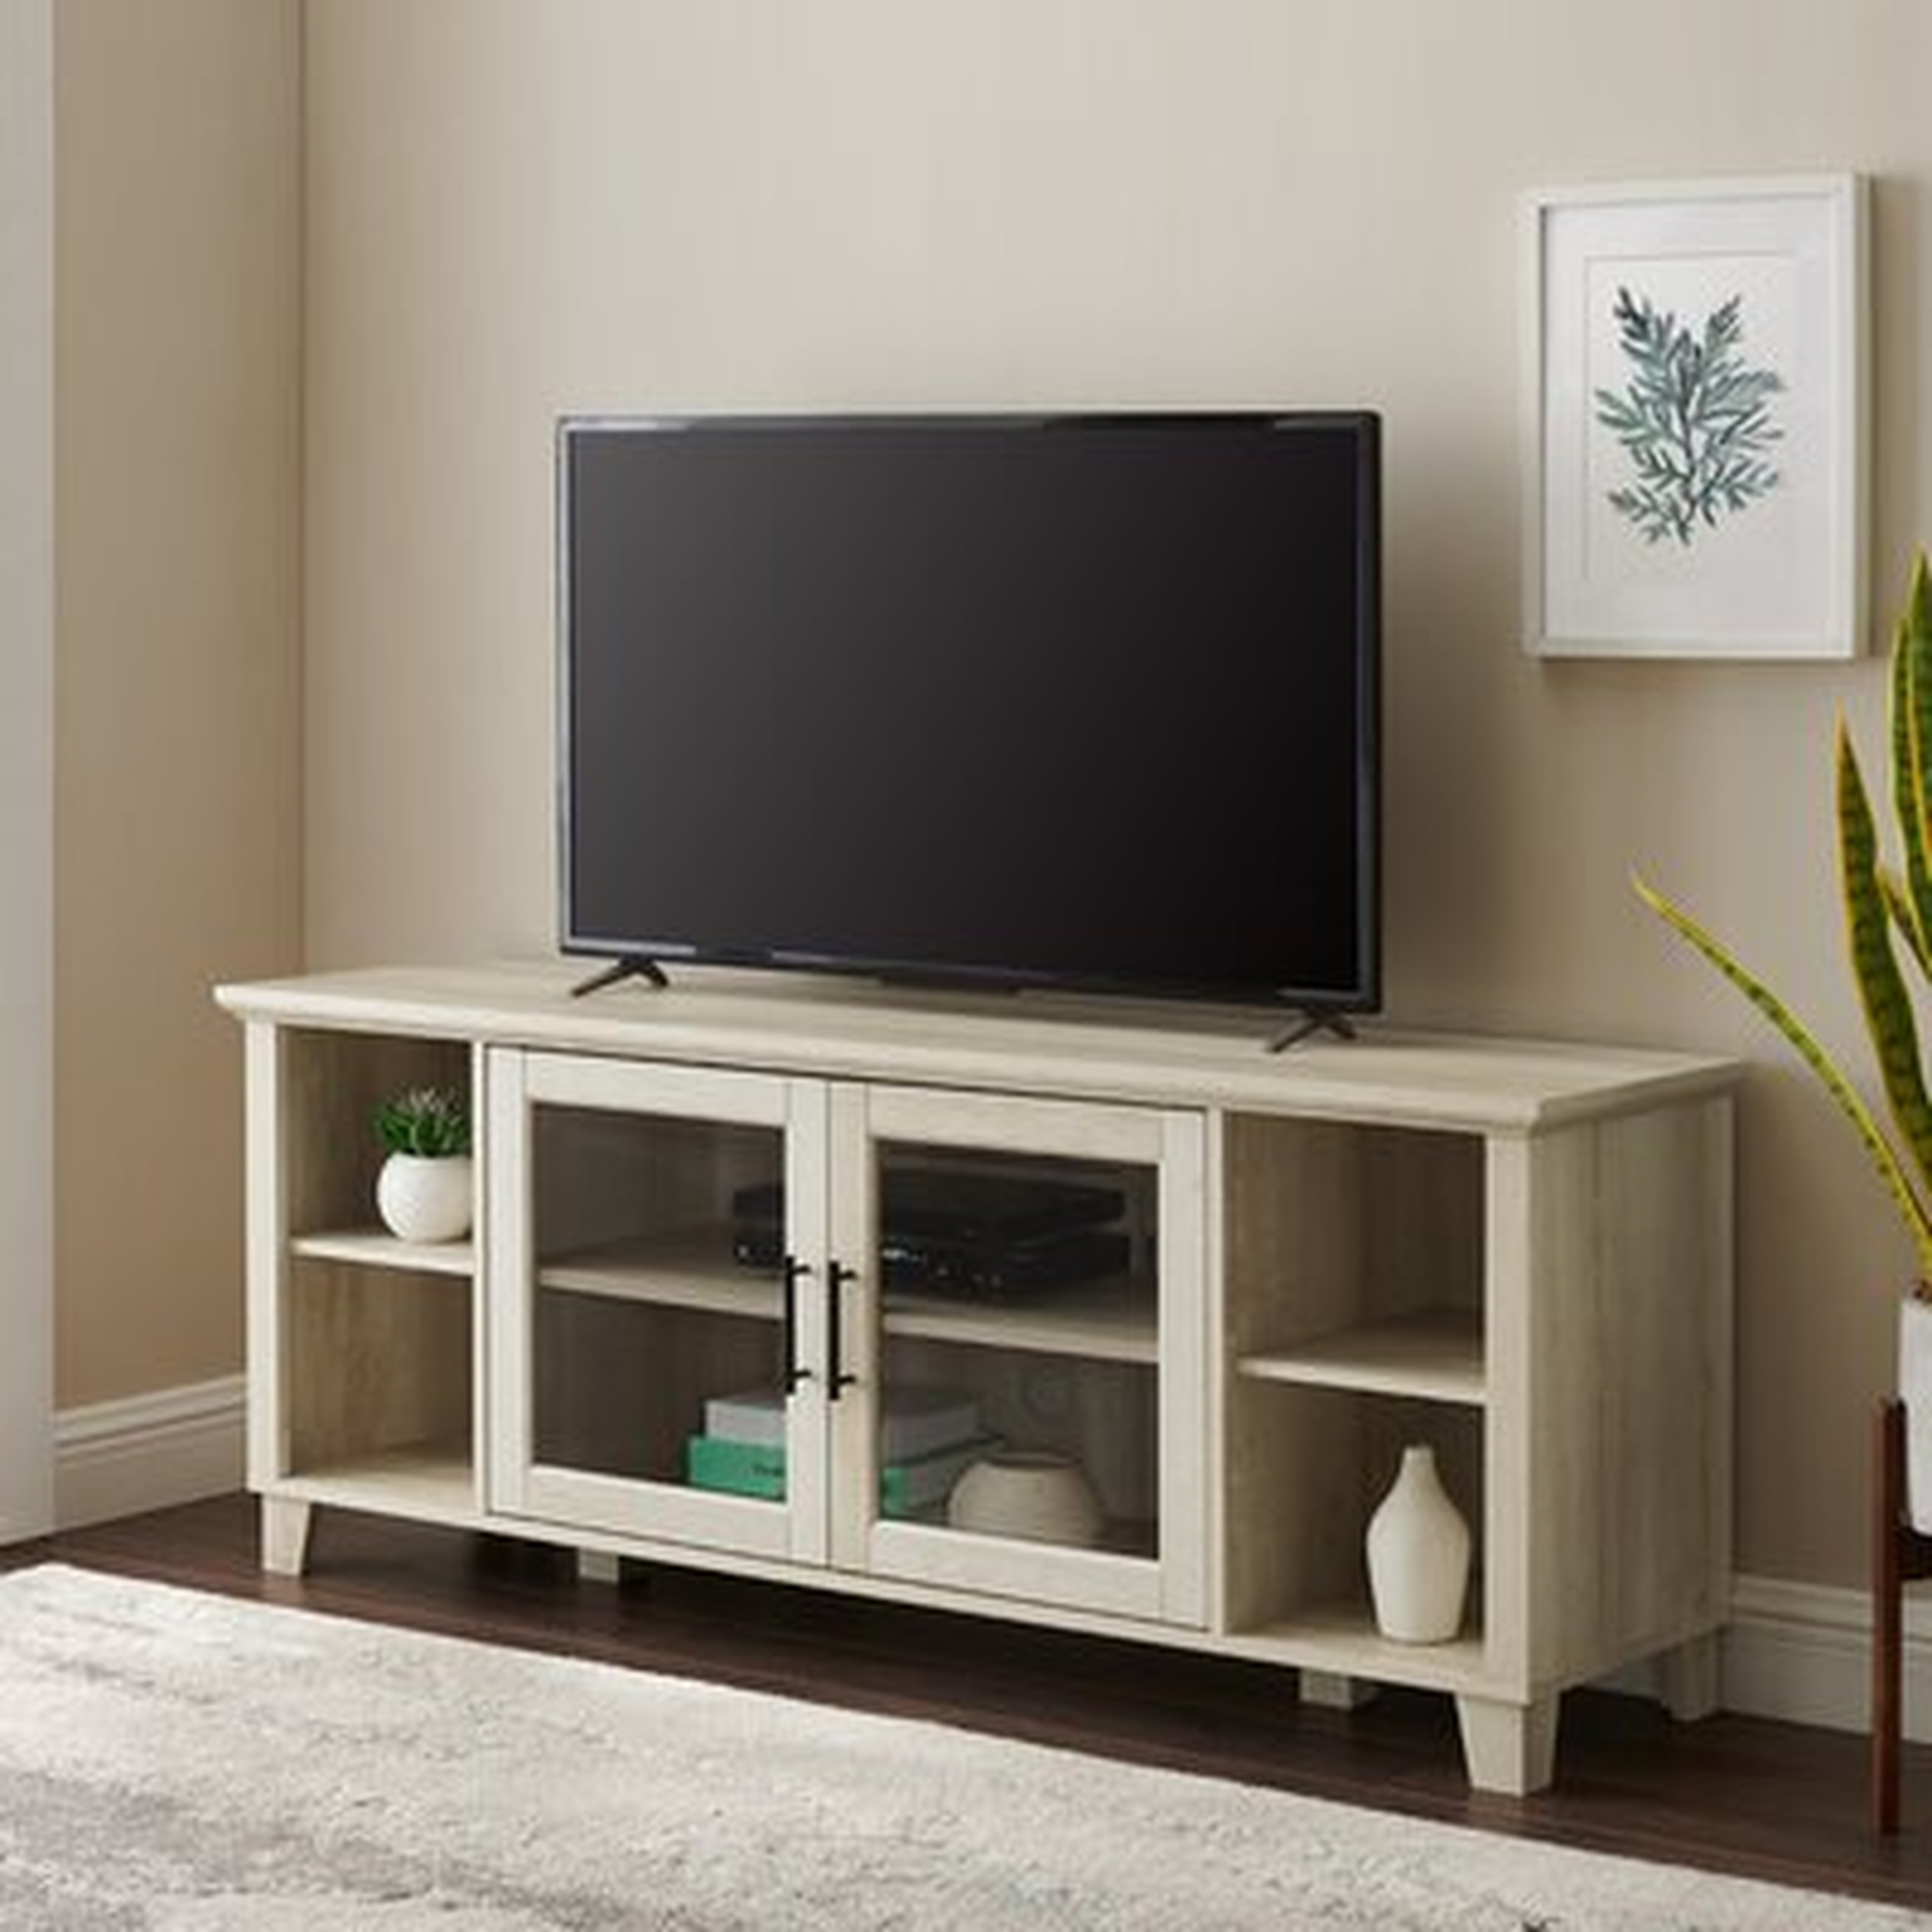 Wingert TV Stand for TVs up to 65 inches - Birch Lane